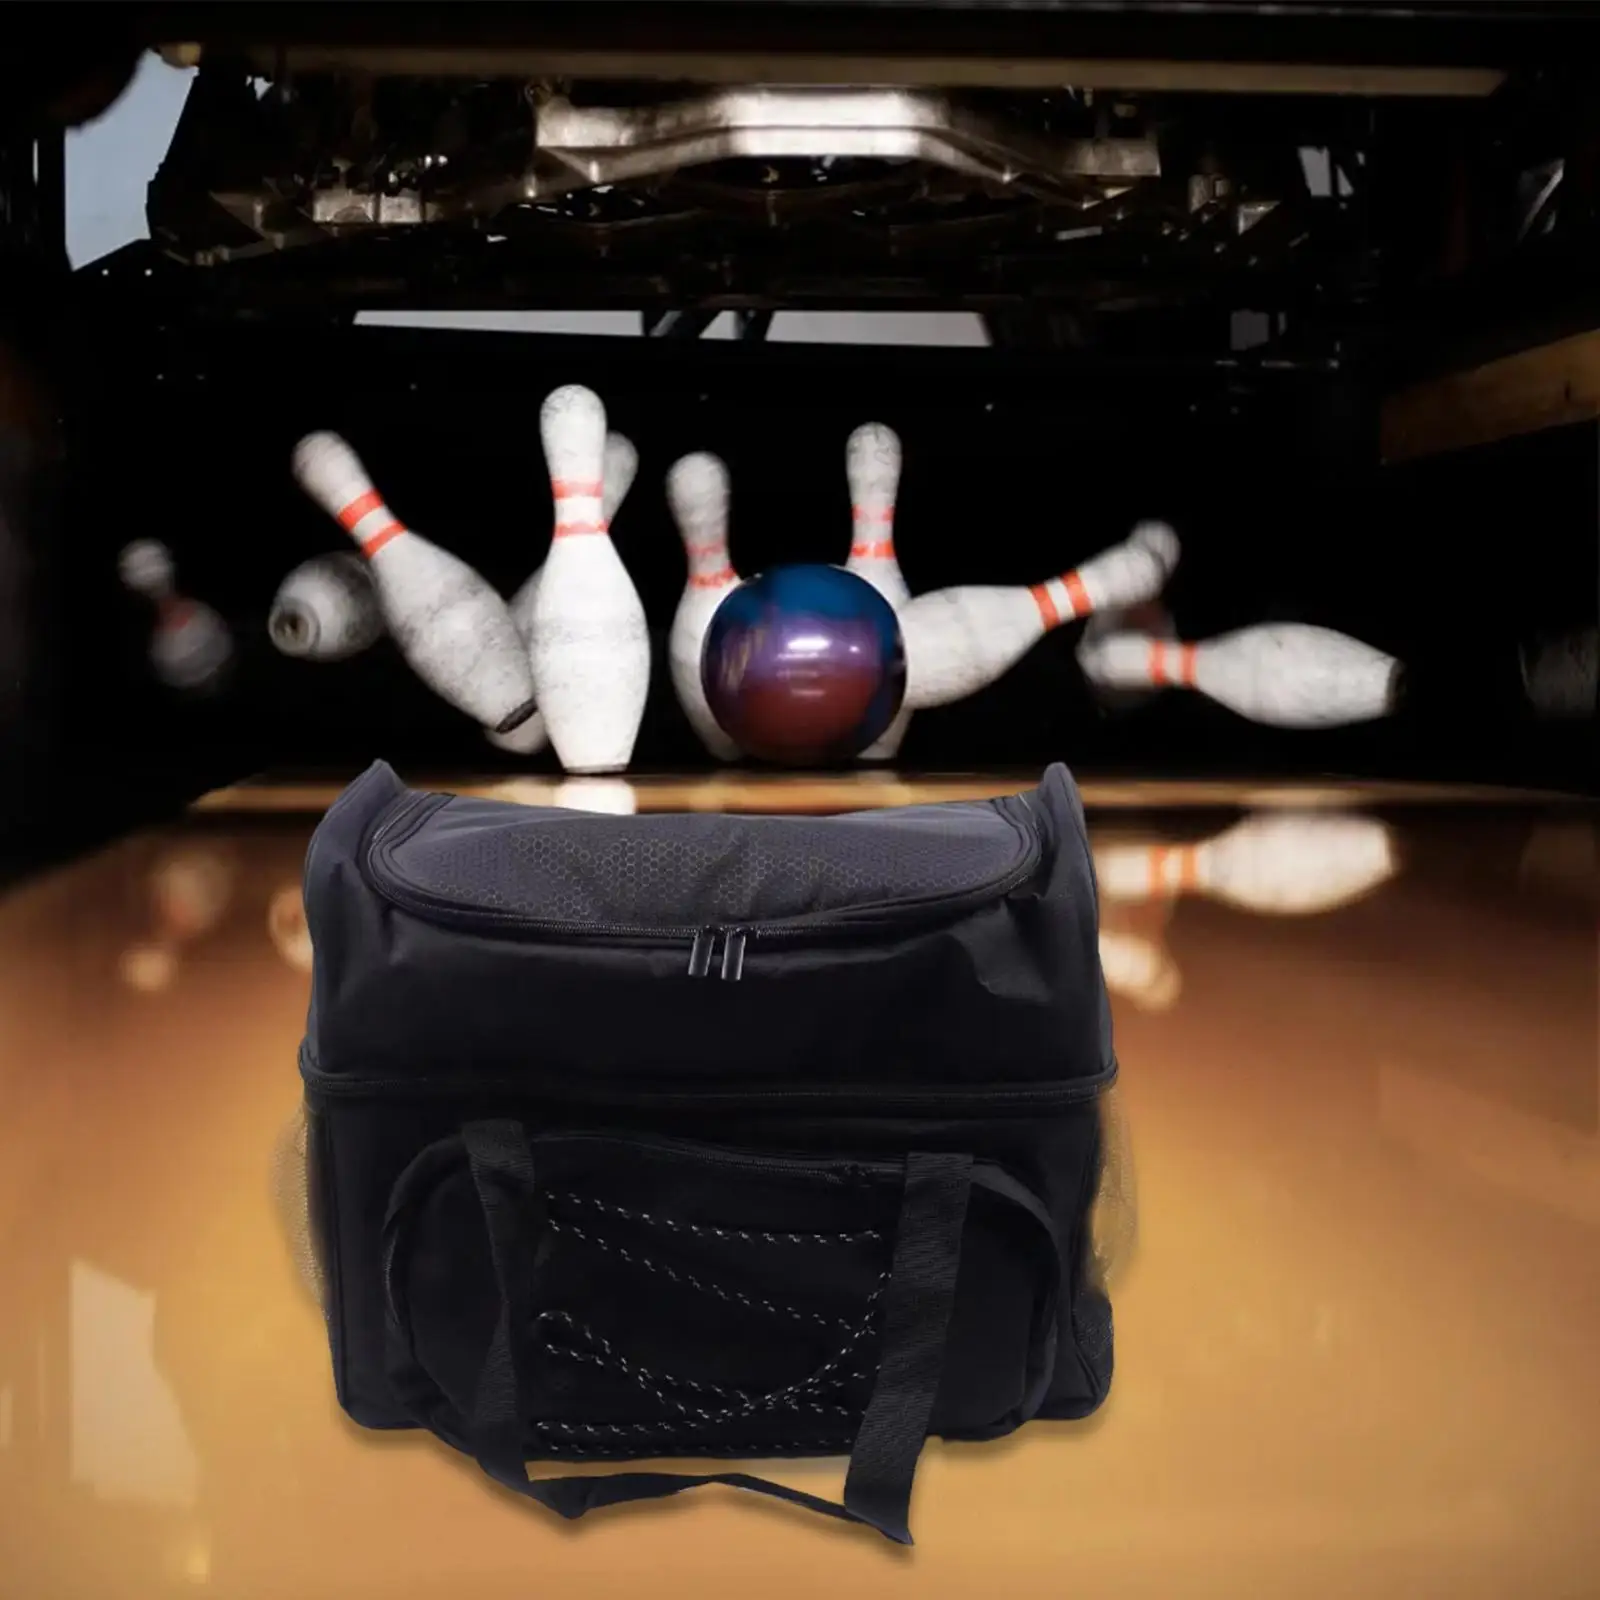 Bowling Tote Bag Durable Storage Pocket Bowling Bag for Two Balls Pouch Fits Bowling Shoes up to Mens Size 16 Bowling Accessory